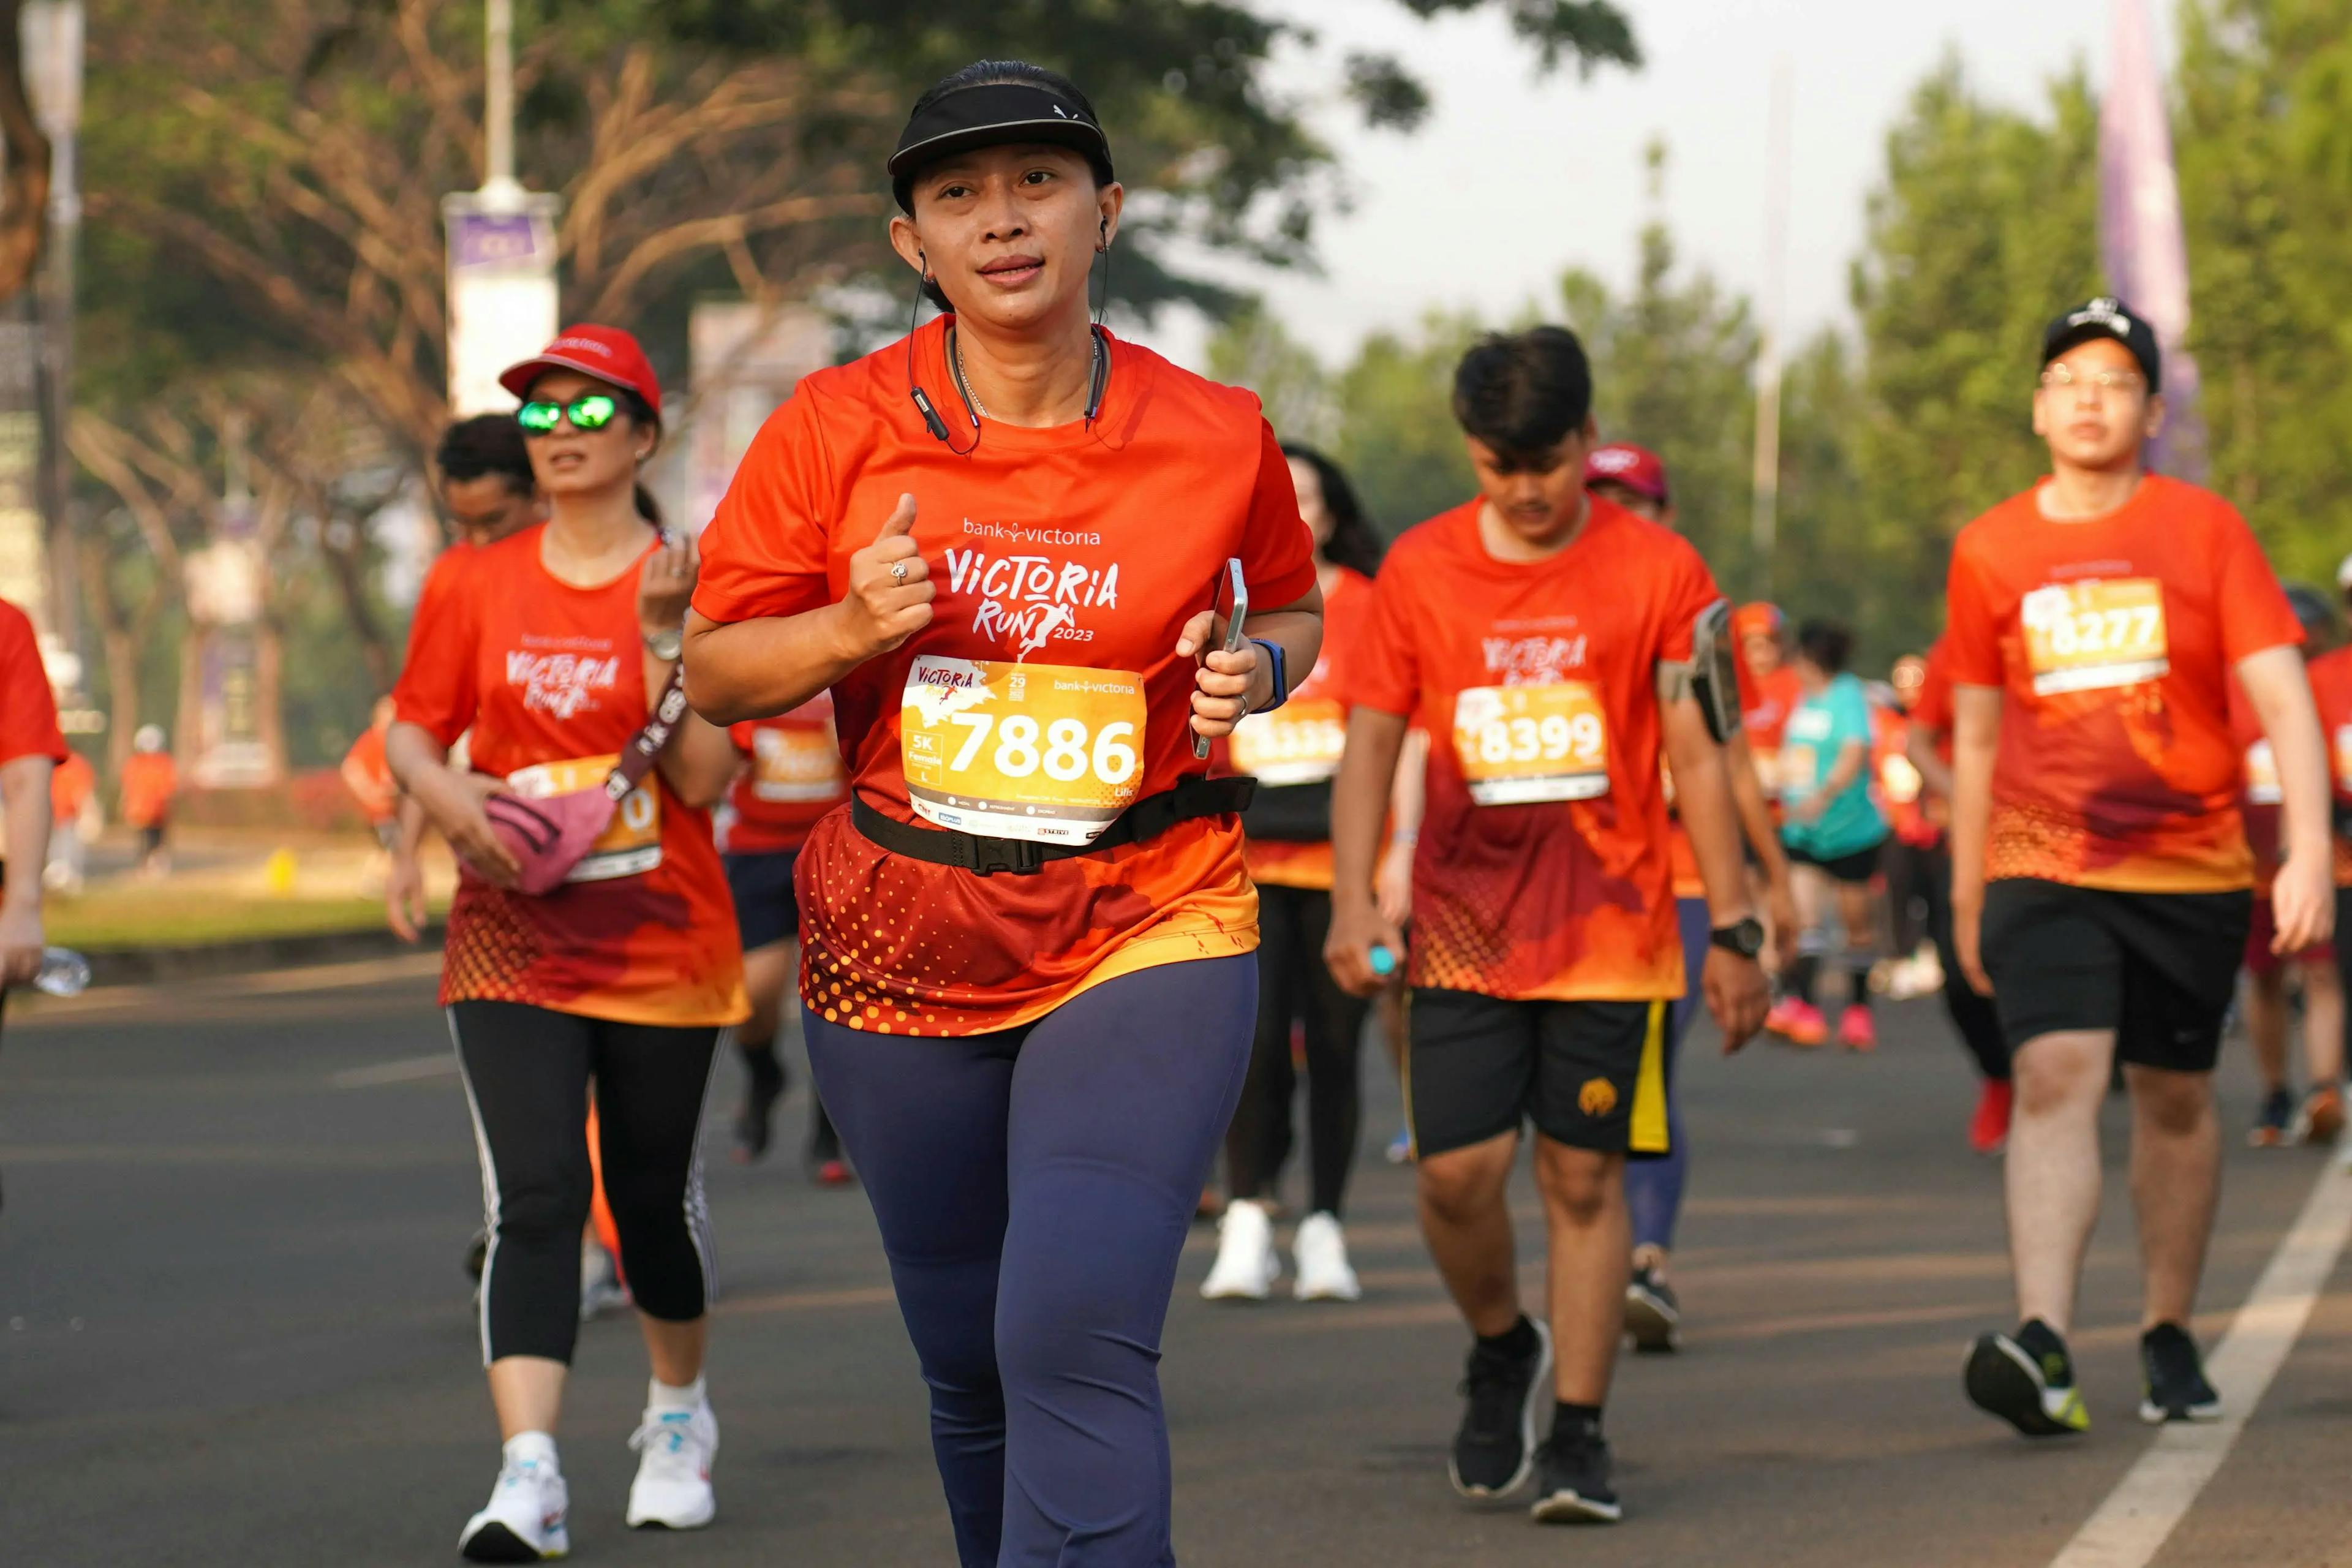 A group of people running together, wearing orange shirts.